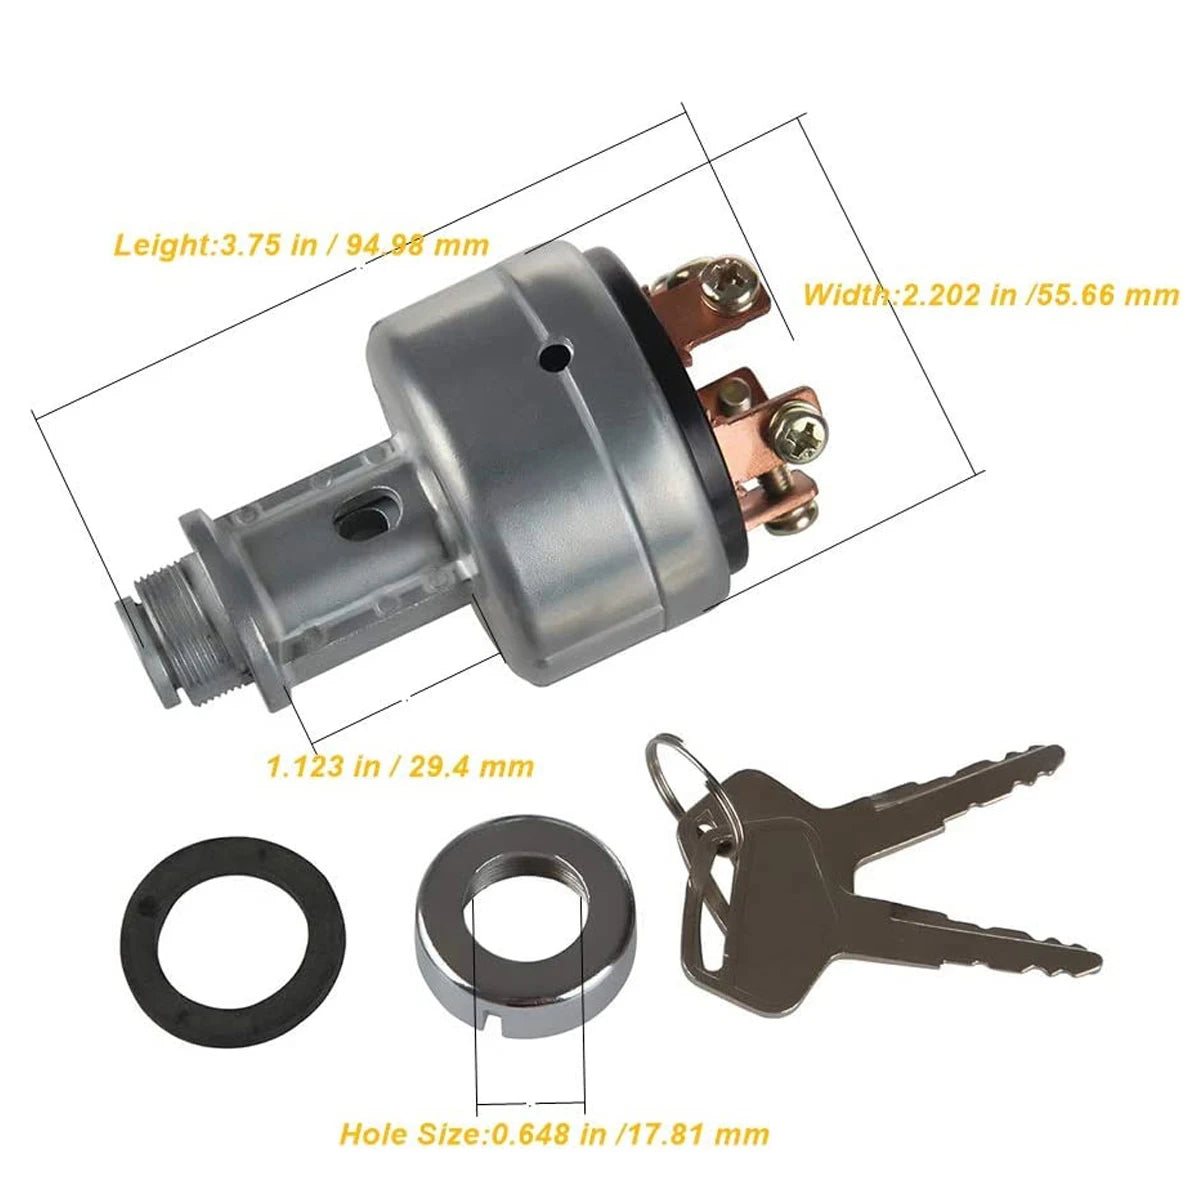 0808610000 Ignition Switch For Komatsu Excavator Fit PC60/120200-3/5/6 08086-10000 08086-20000 08086-50000 Electric Door Lock